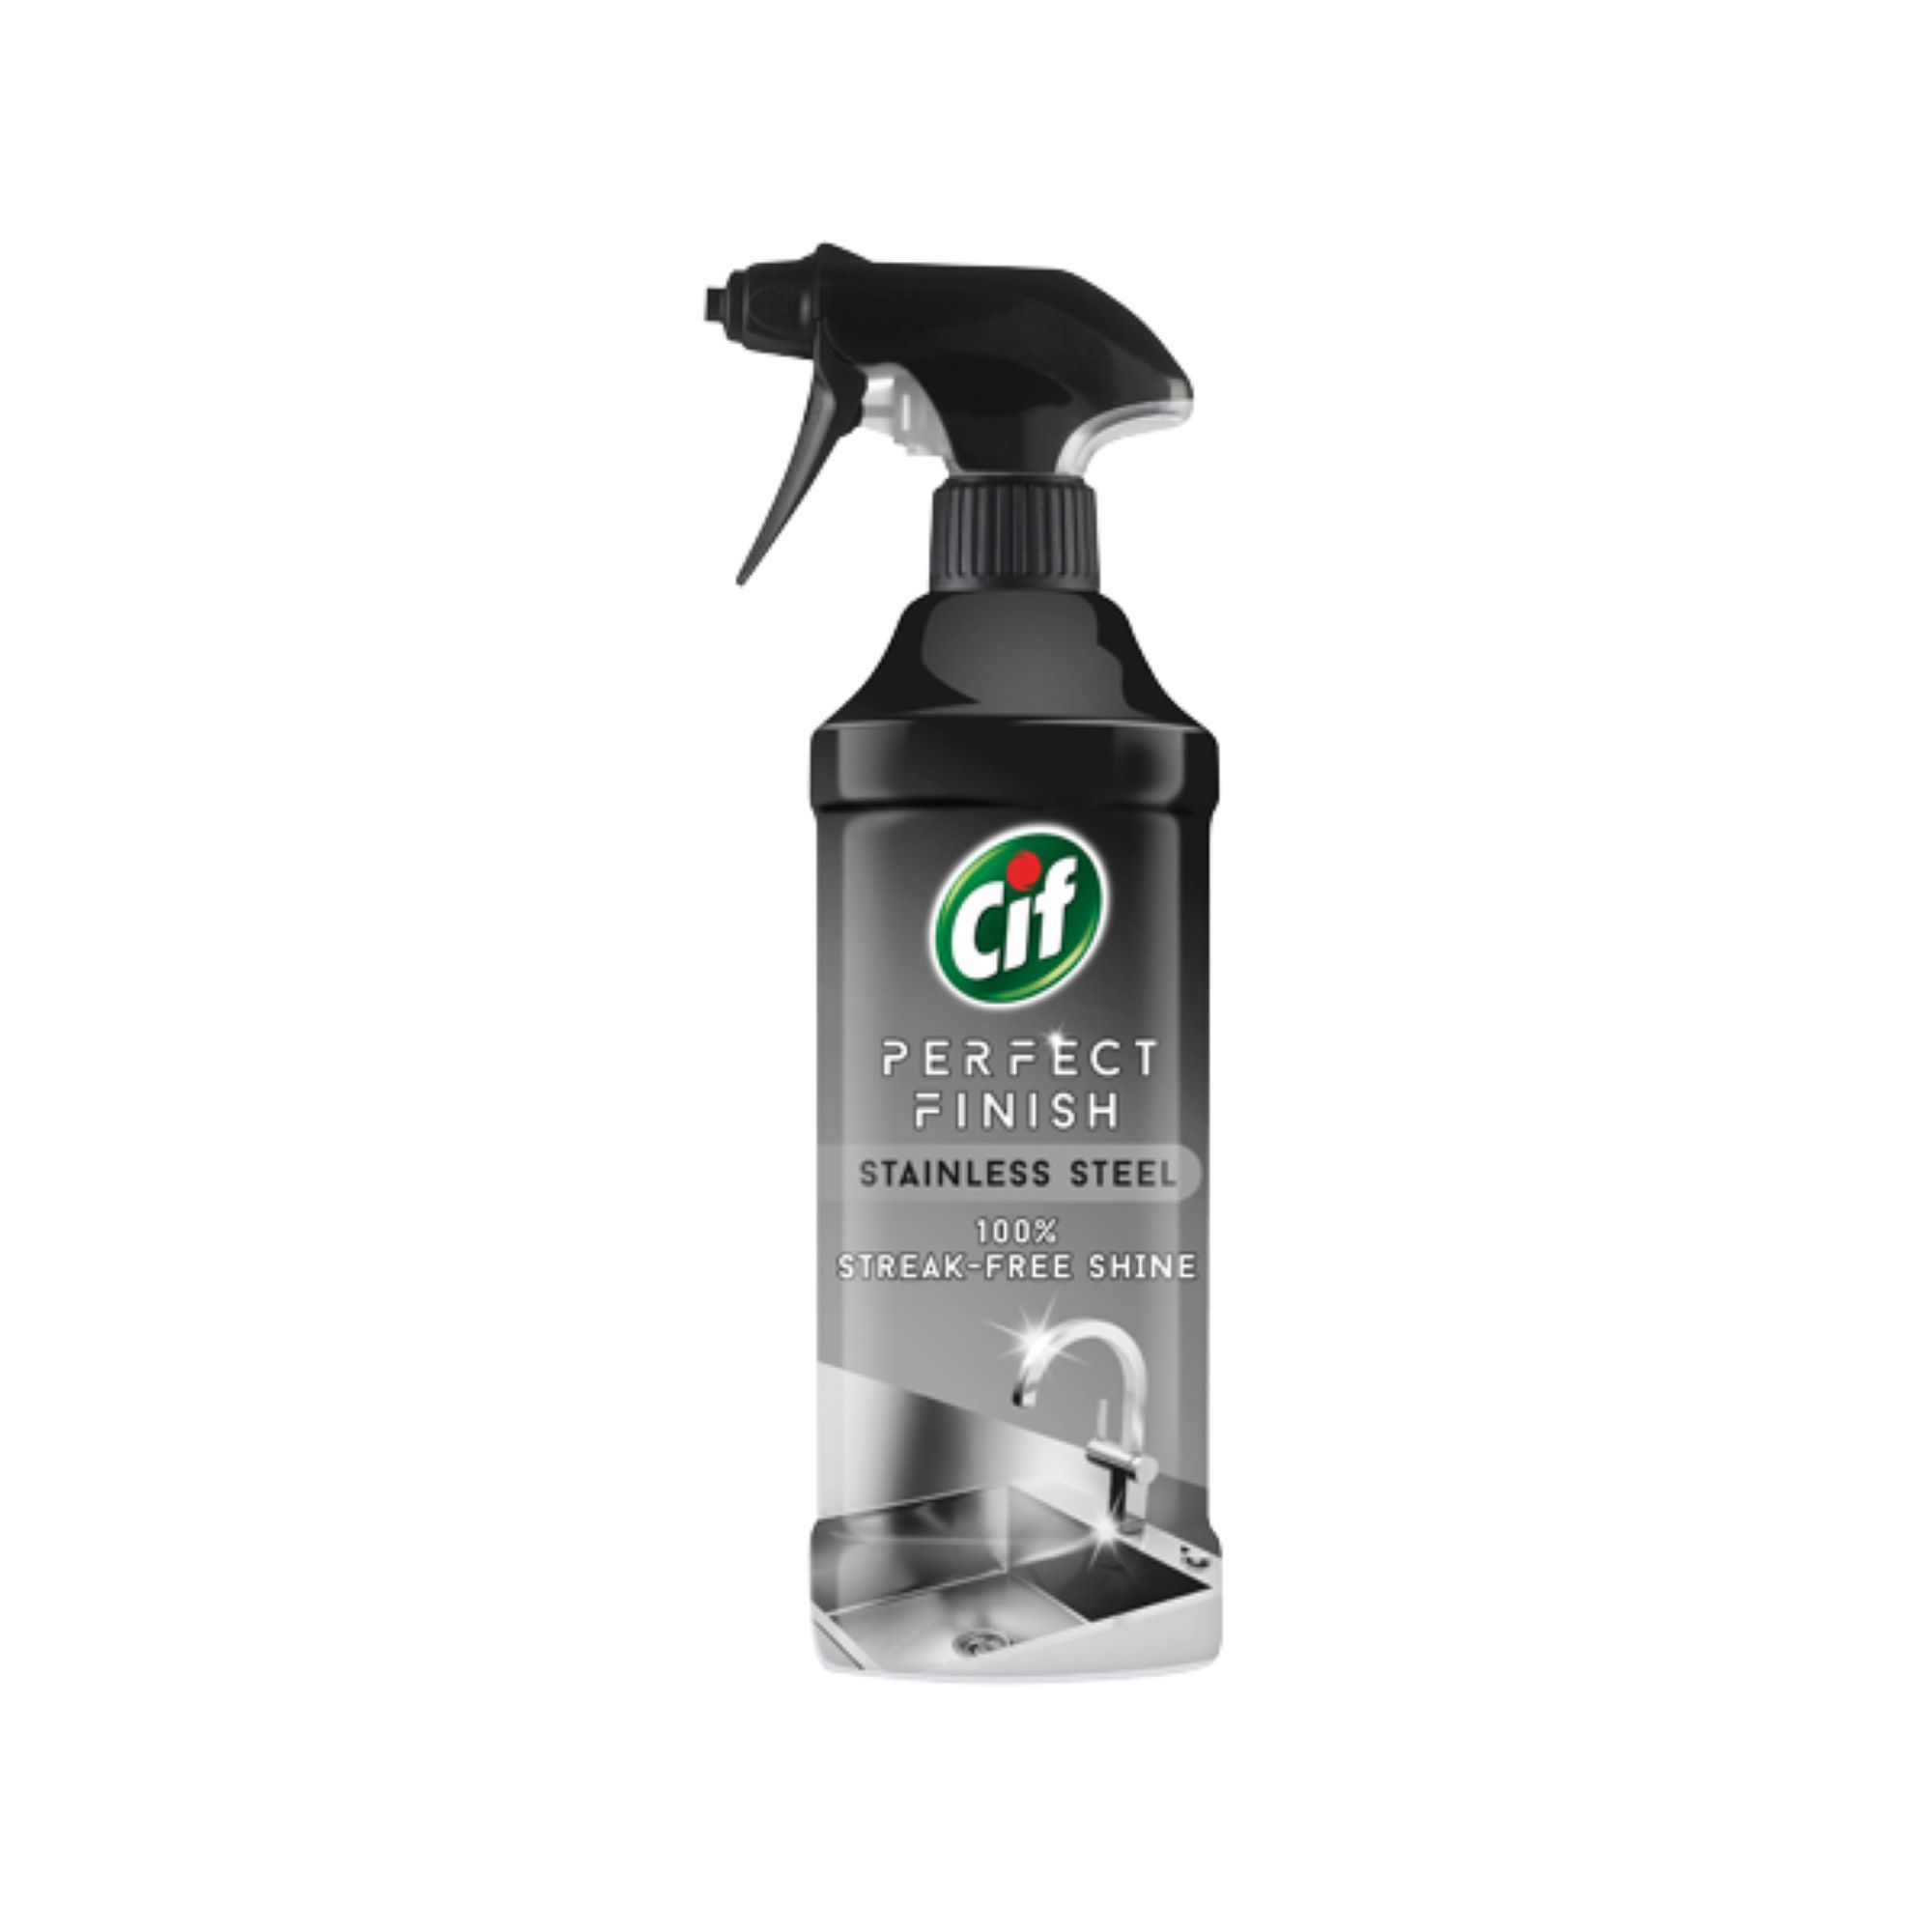 Cif Perfect Finish Stainless steel Multi-surface Cleaning spray, 435ml